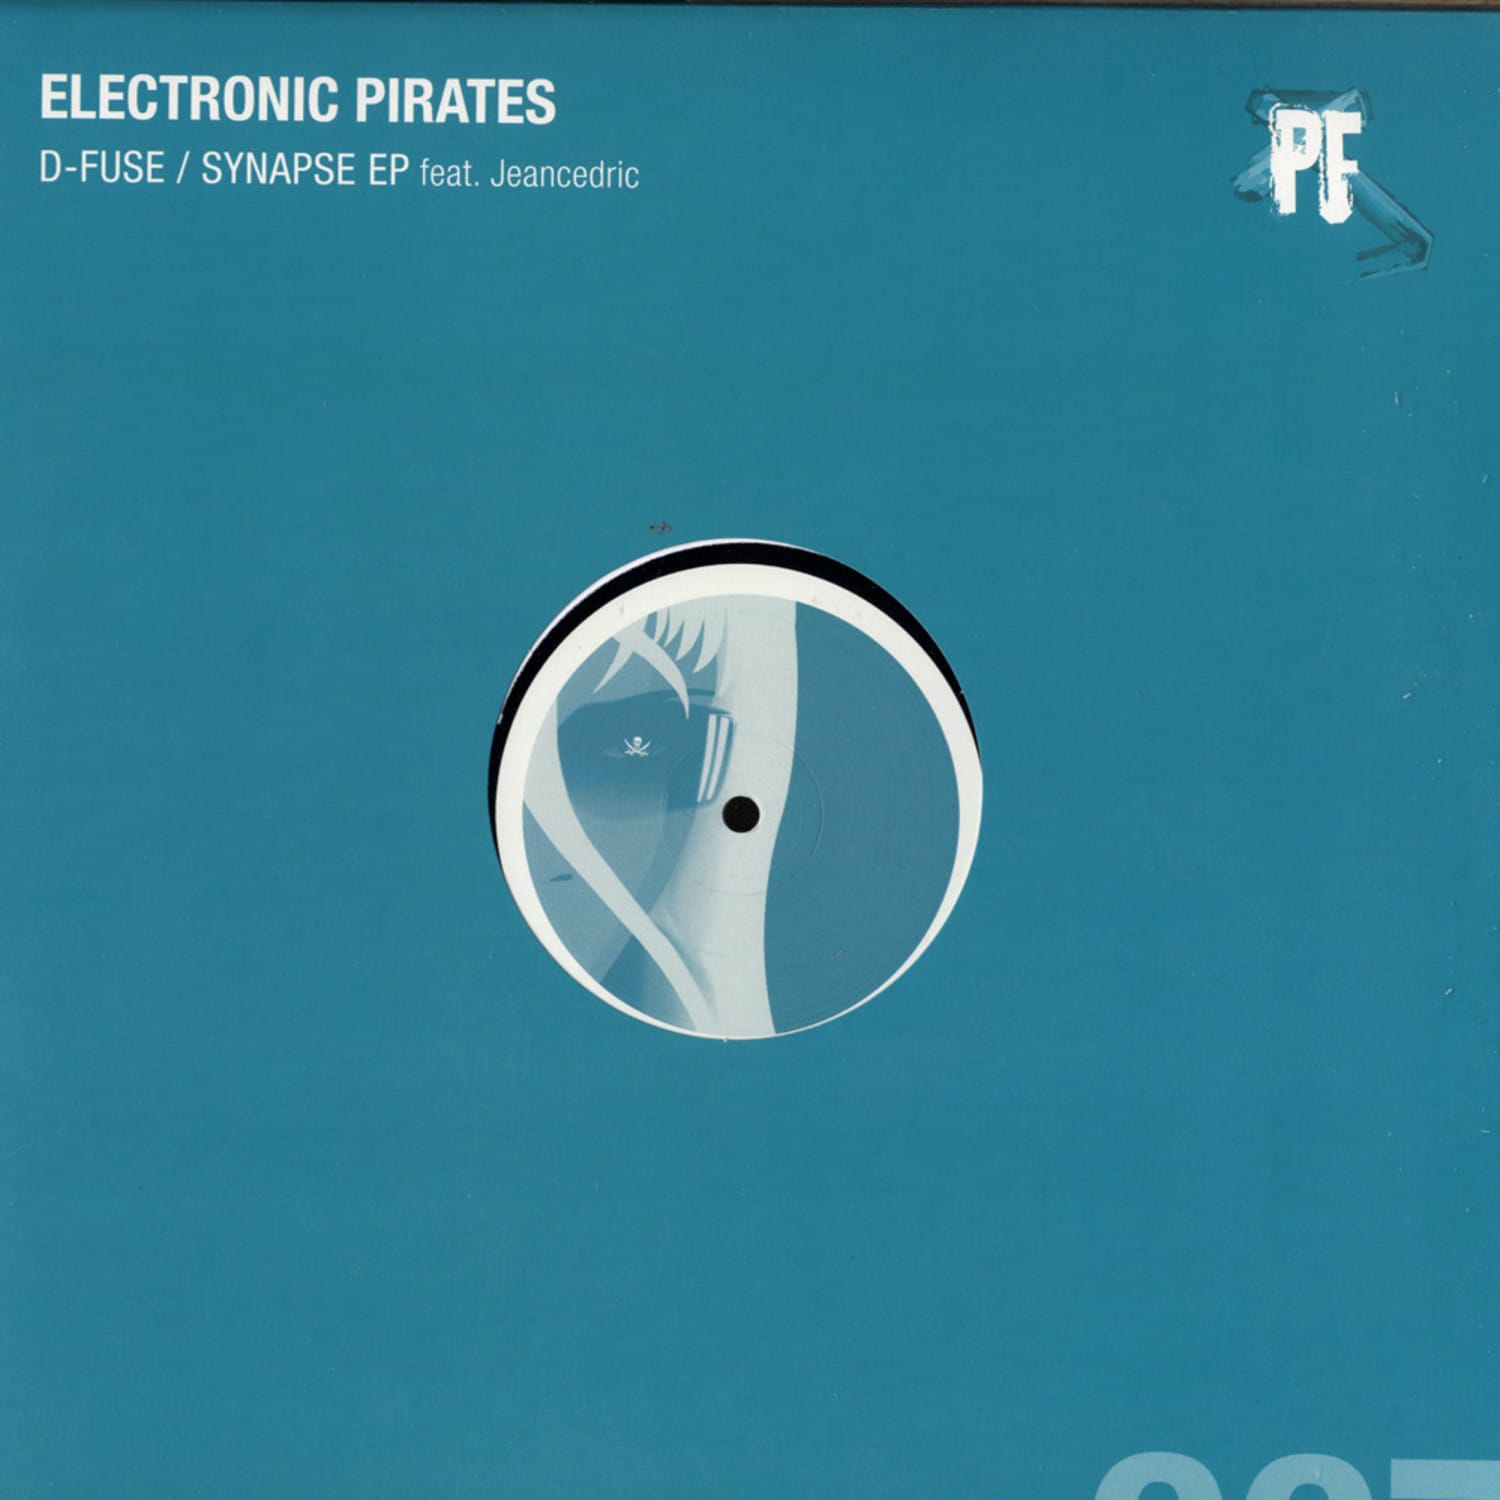 ELECTRONIC PIRATES FEAT JEANCEDRIC - D-FUSE / SYNAPSE EP